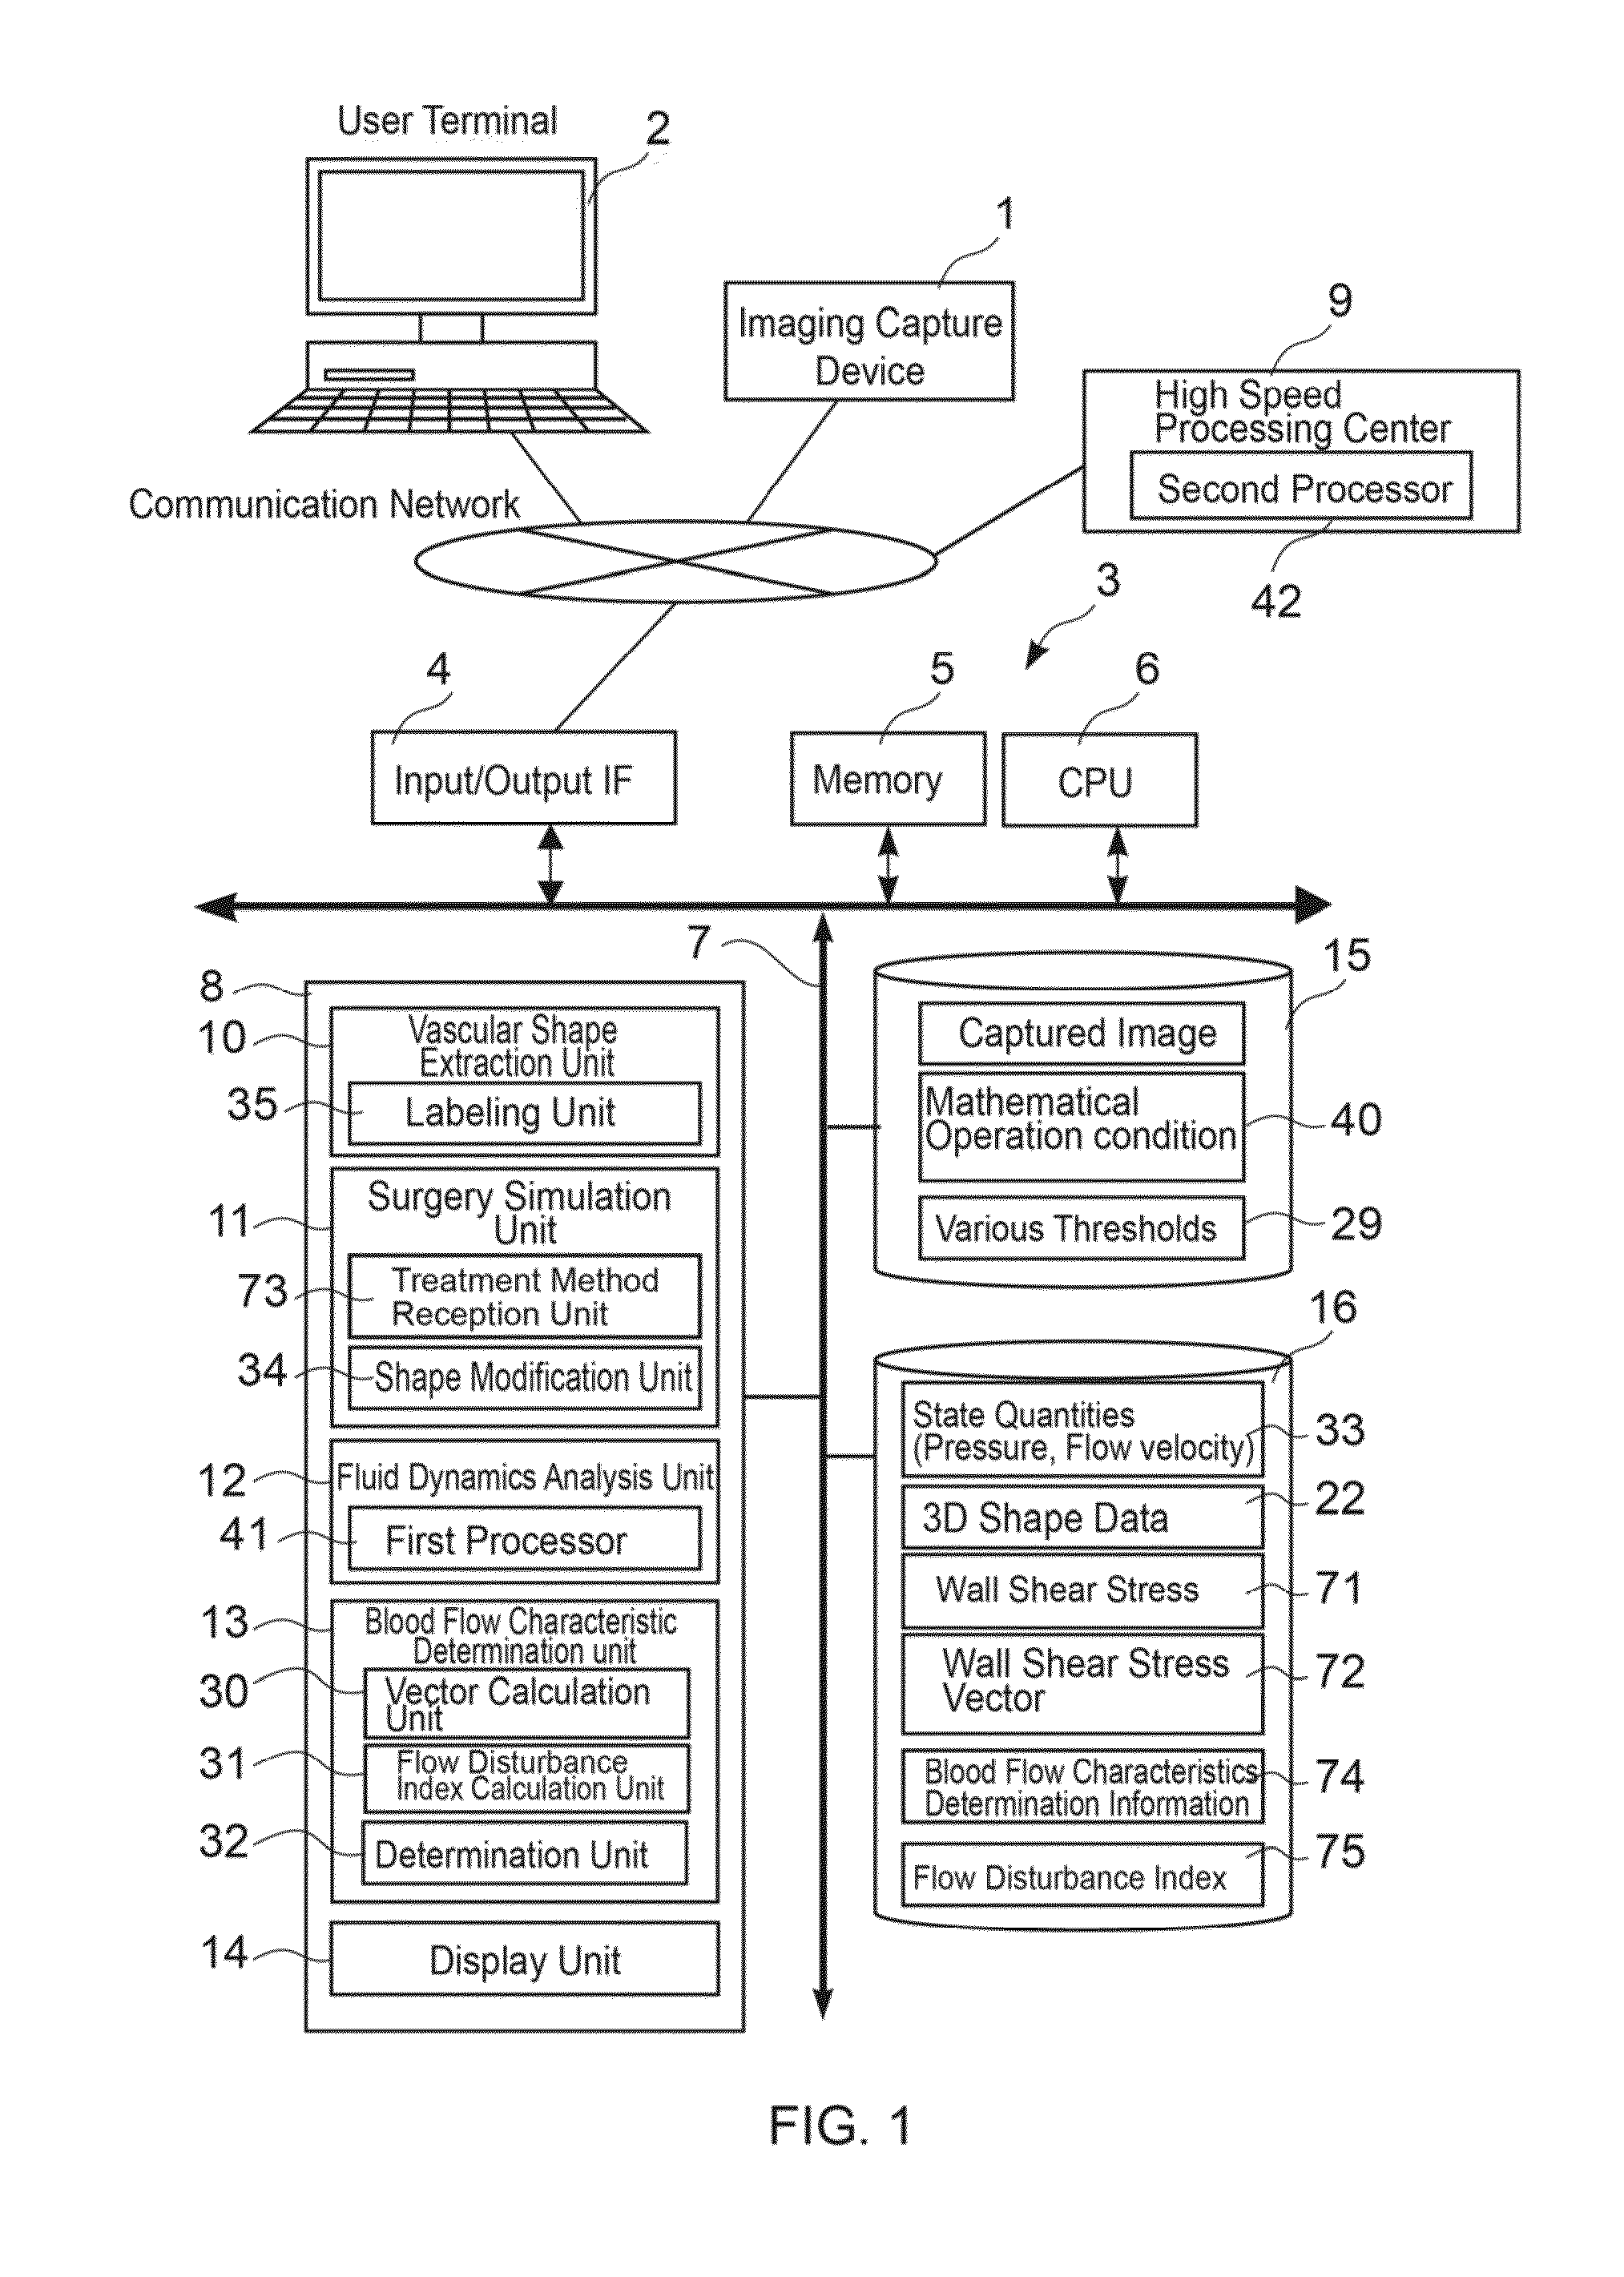 System for diagnosing bloodflow characteristics, method thereof, and computer software program